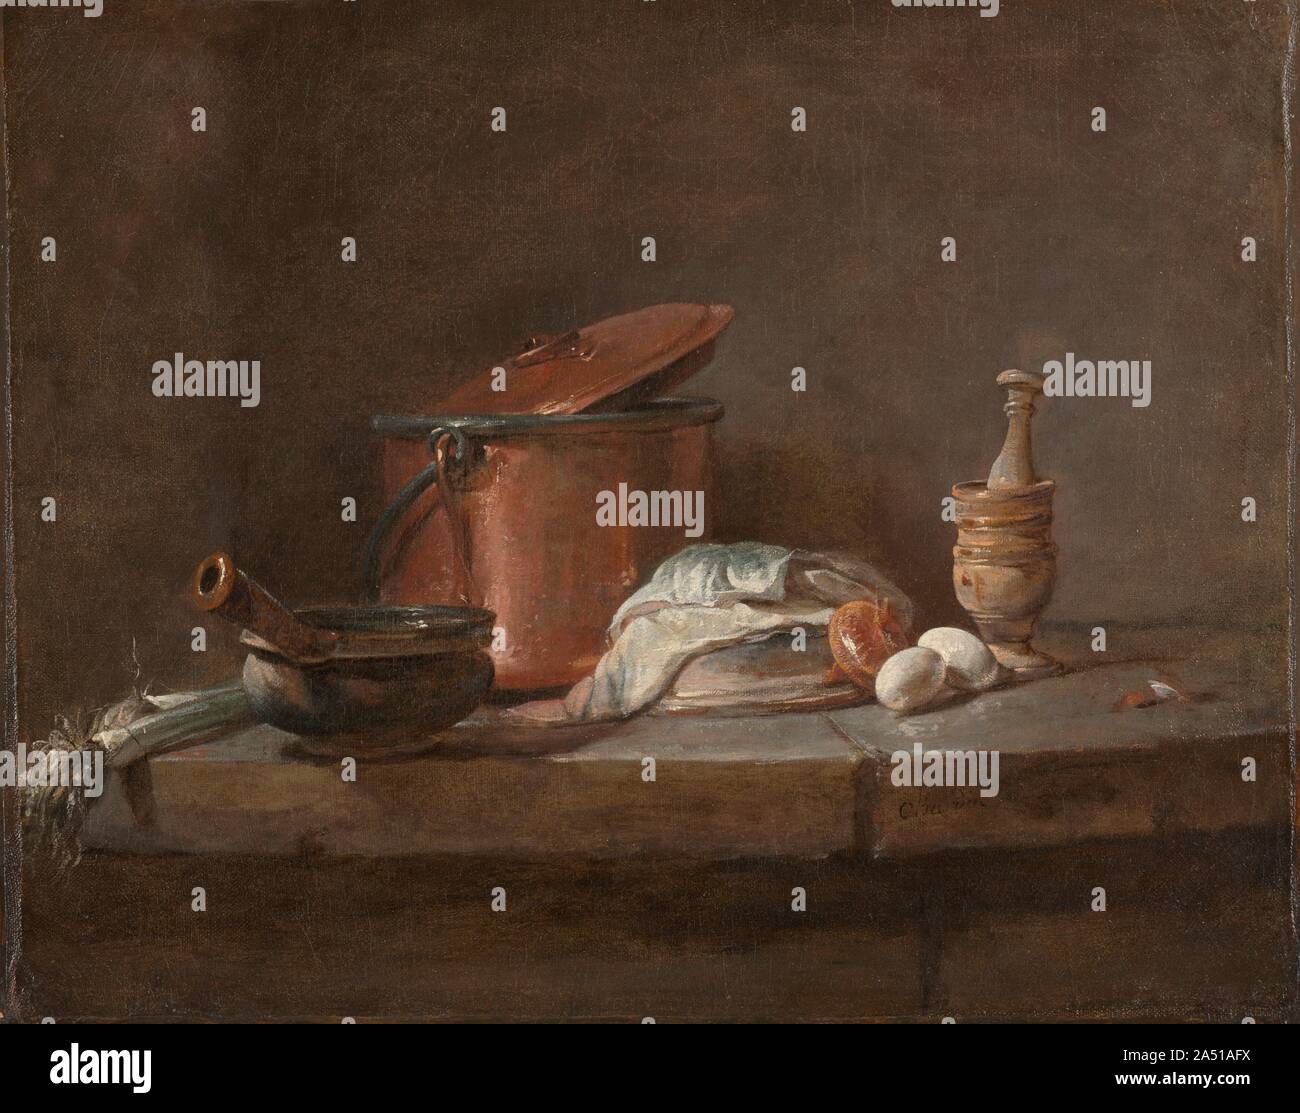 Kitchen Utensils with Leeks, Fish, and Eggs, c. 1734. Chardin was already famous by 1730, when he began to paint small, sparse still lifes of kitchen utensils. He often used the same elements in his compositions, varying slightly the position of the objects and adding or subtracting a utensil&#x2014;always carefully placing each in relation to the rest to achieve a balanced design. Chardin was the contemporary of Fran&#xe7;ois Boucher (1703-1770) and he taught Jean-Honor&#xe9; Fragonard (1732-1806), but his work is a contrast to theirs, representing the naturalistic tendency that persisted alo Stock Photo